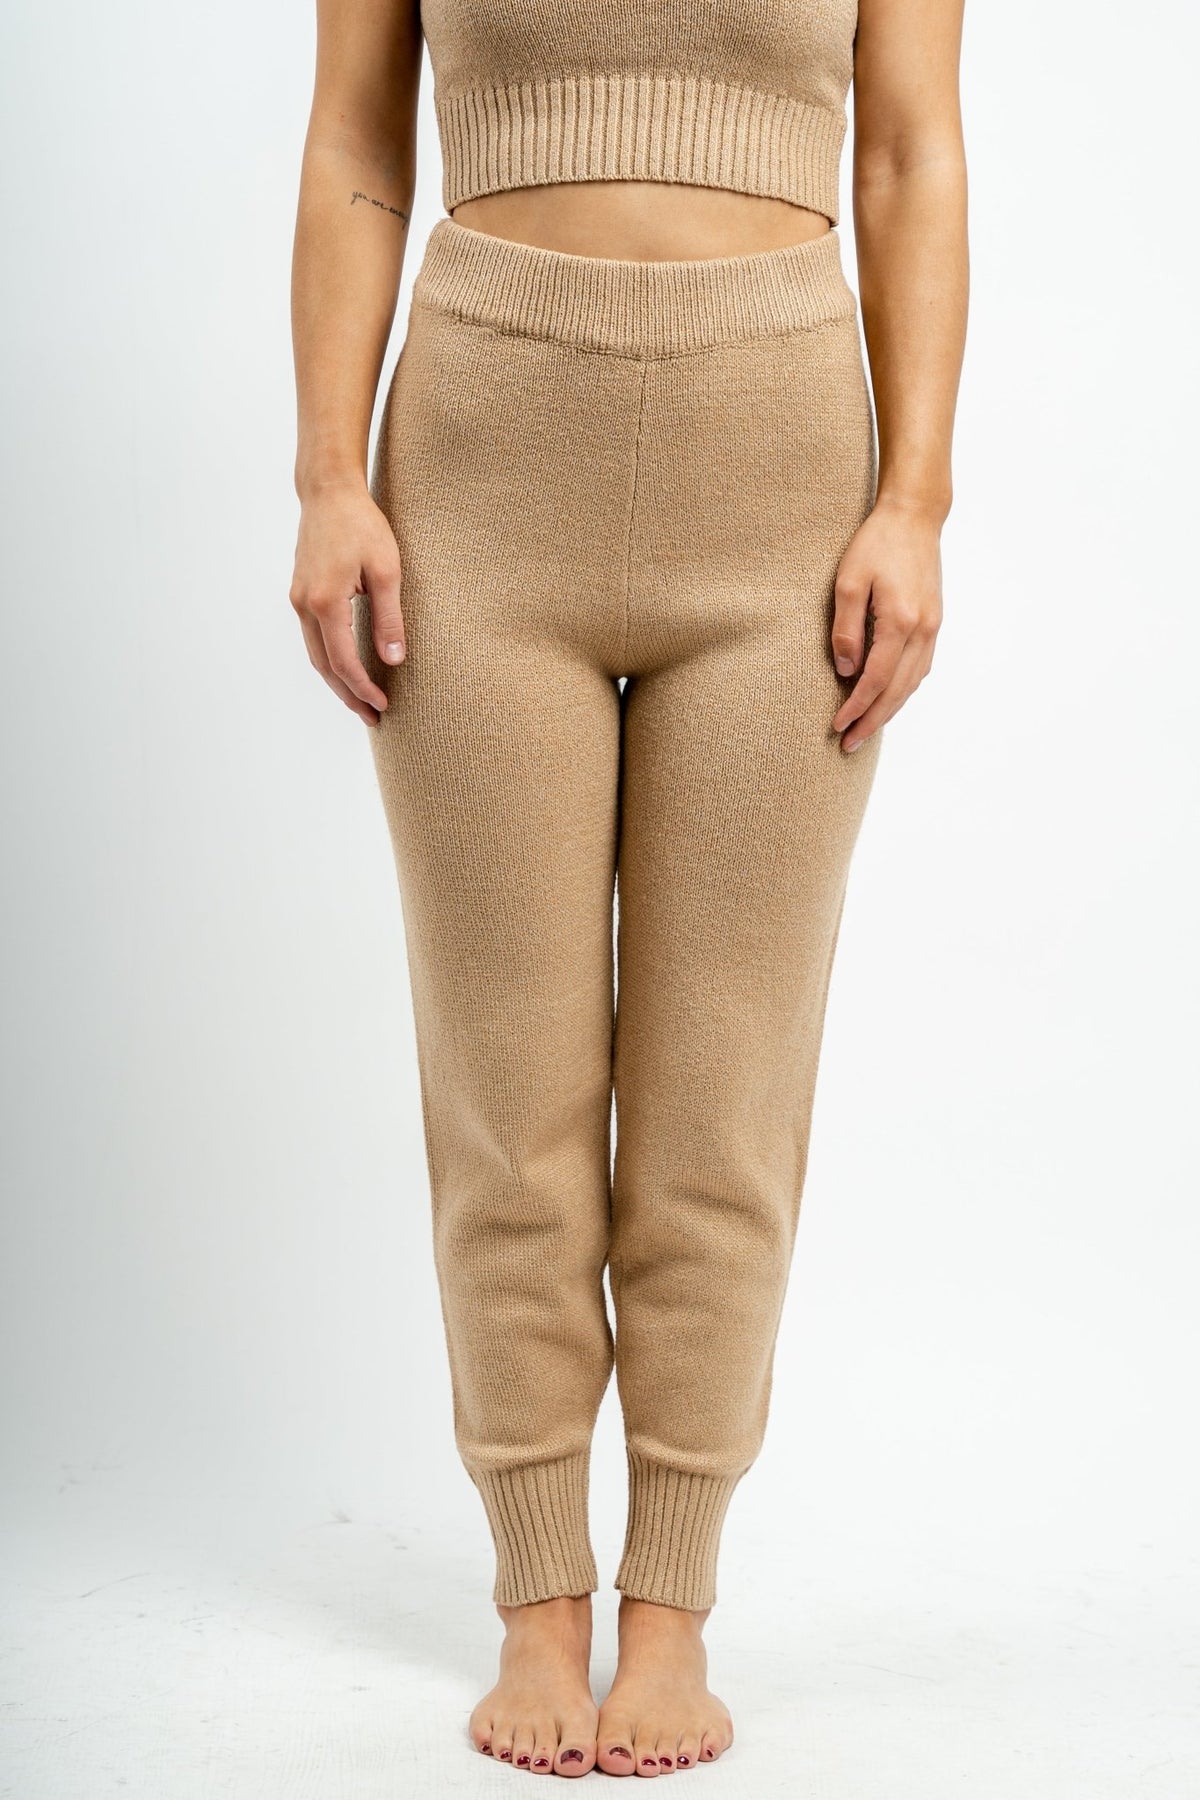 Knit jogger pant camel - Trendy Pants - Cute Loungewear Collection at Lush Fashion Lounge Boutique in Oklahoma City